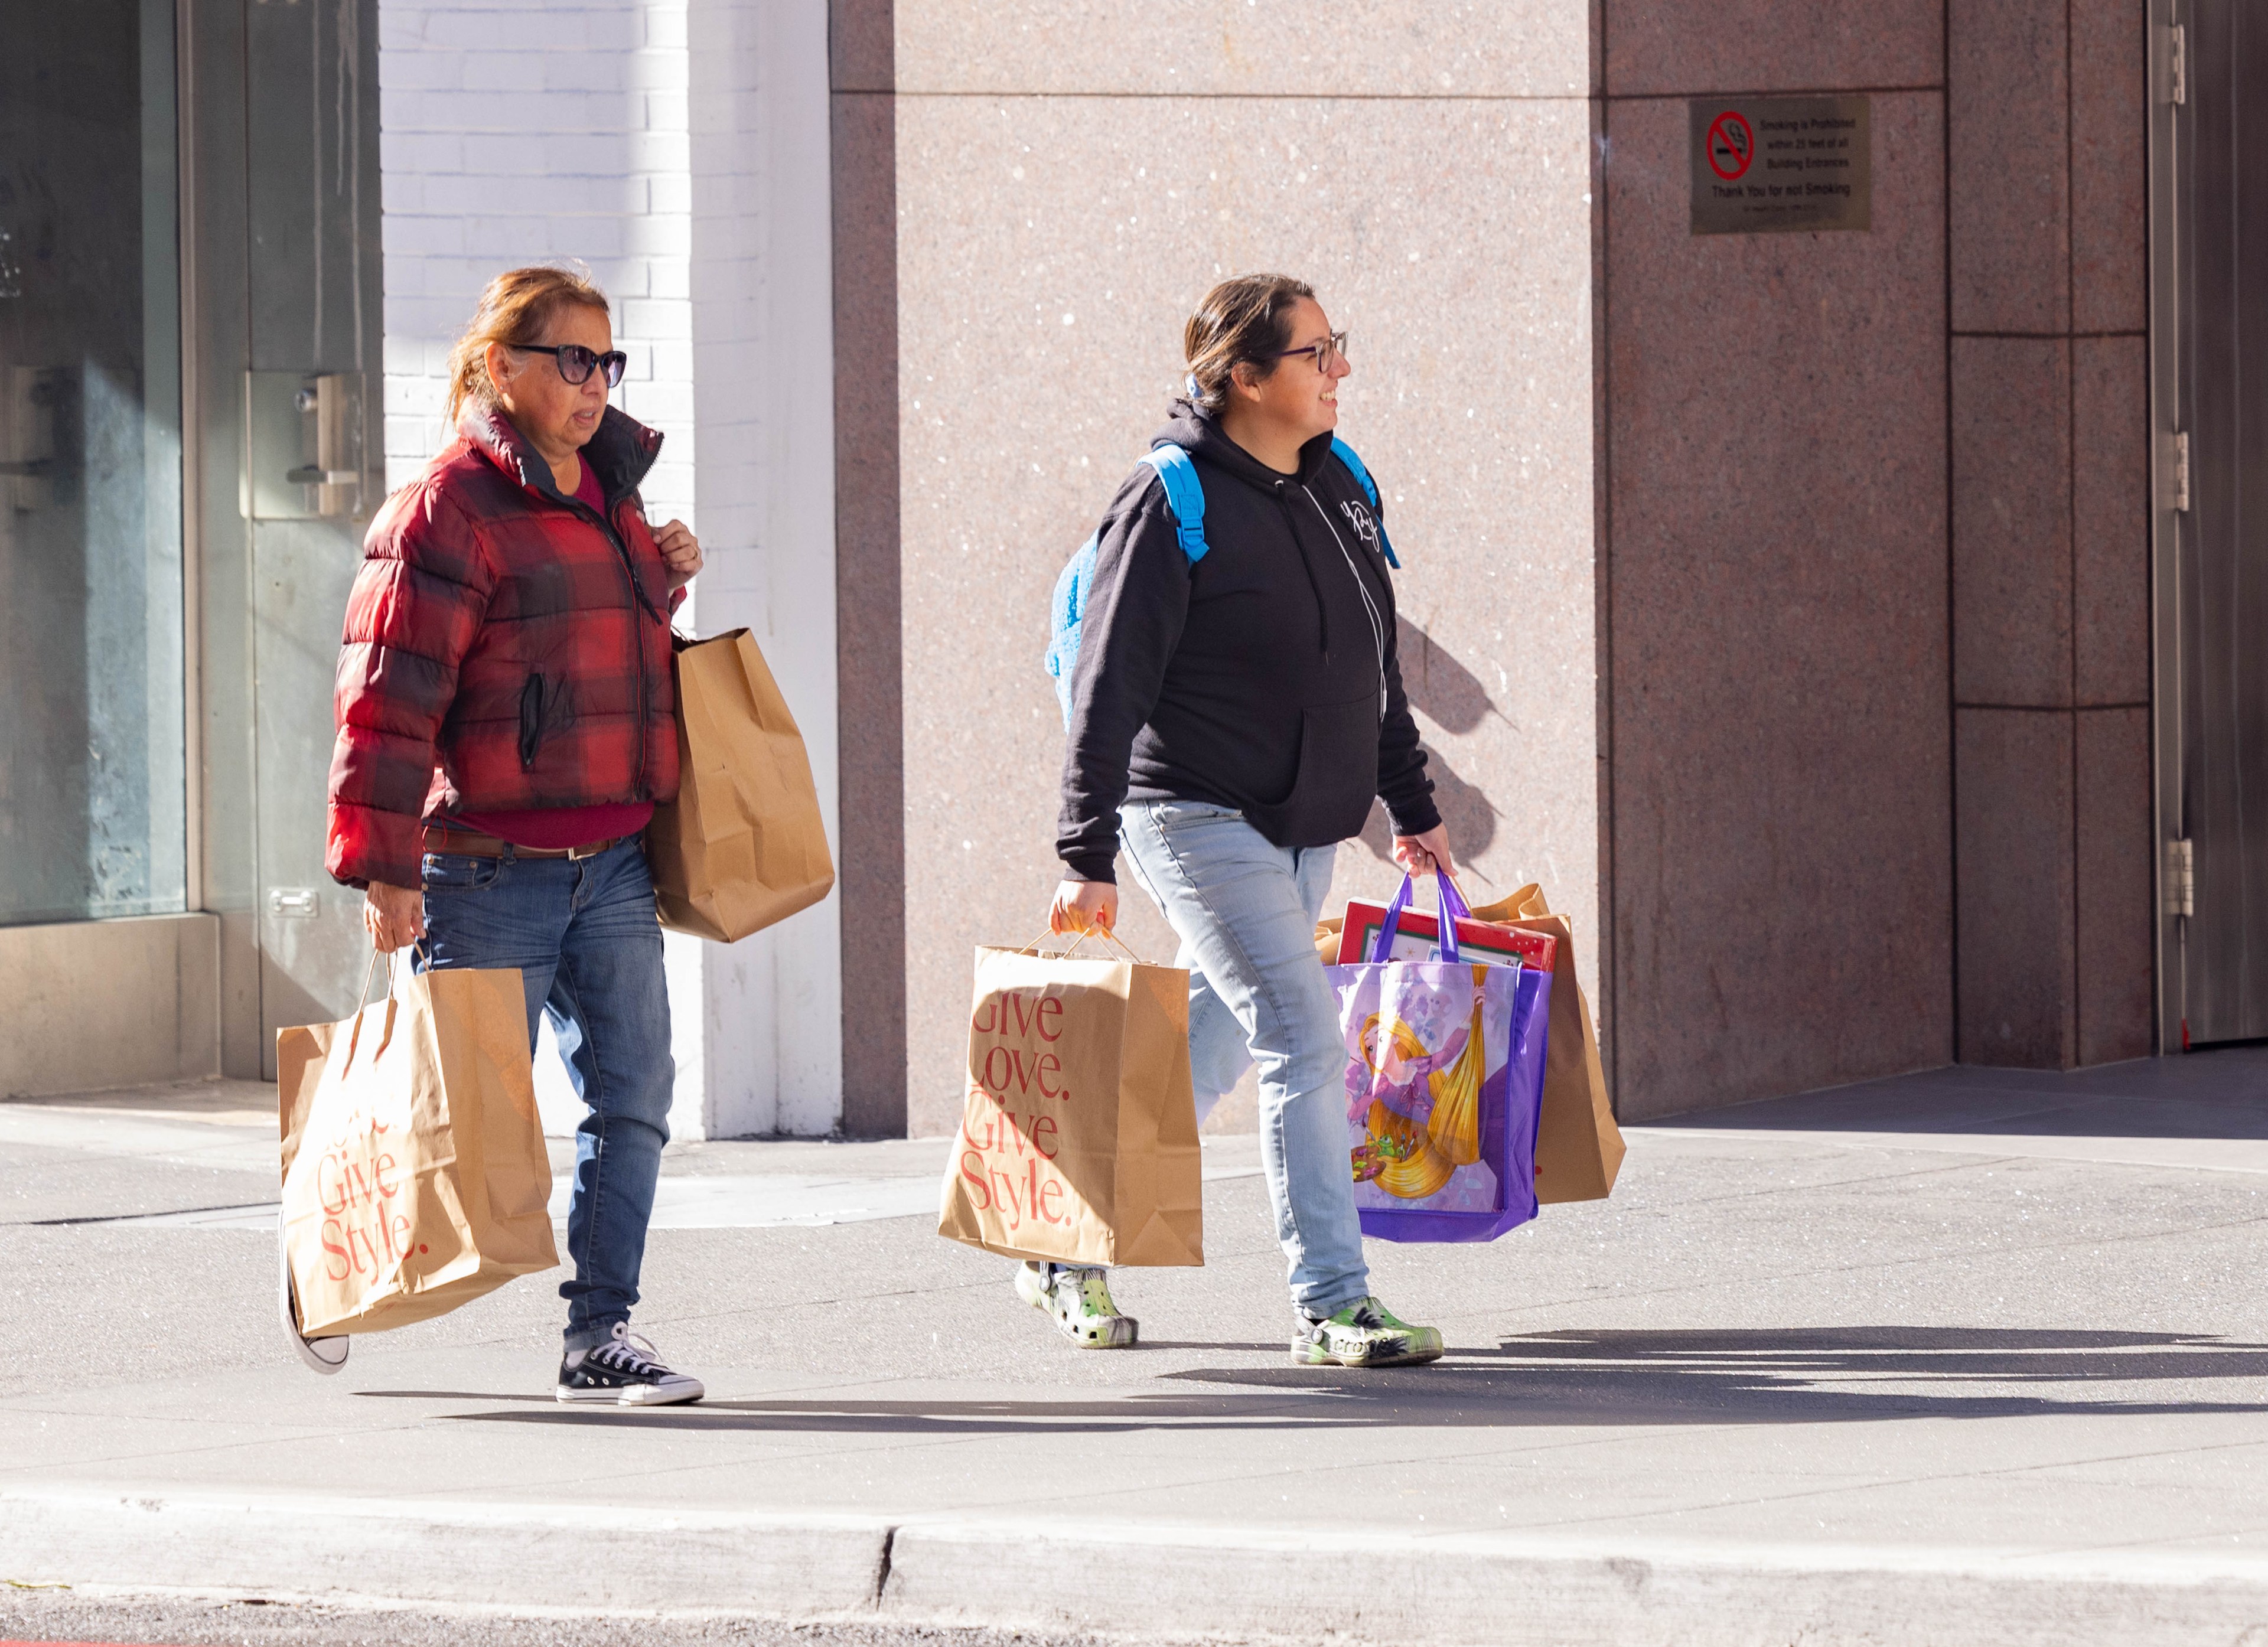 Two people walking on a sidewalk, carrying multiple shopping bags, with a sunny city backdrop.